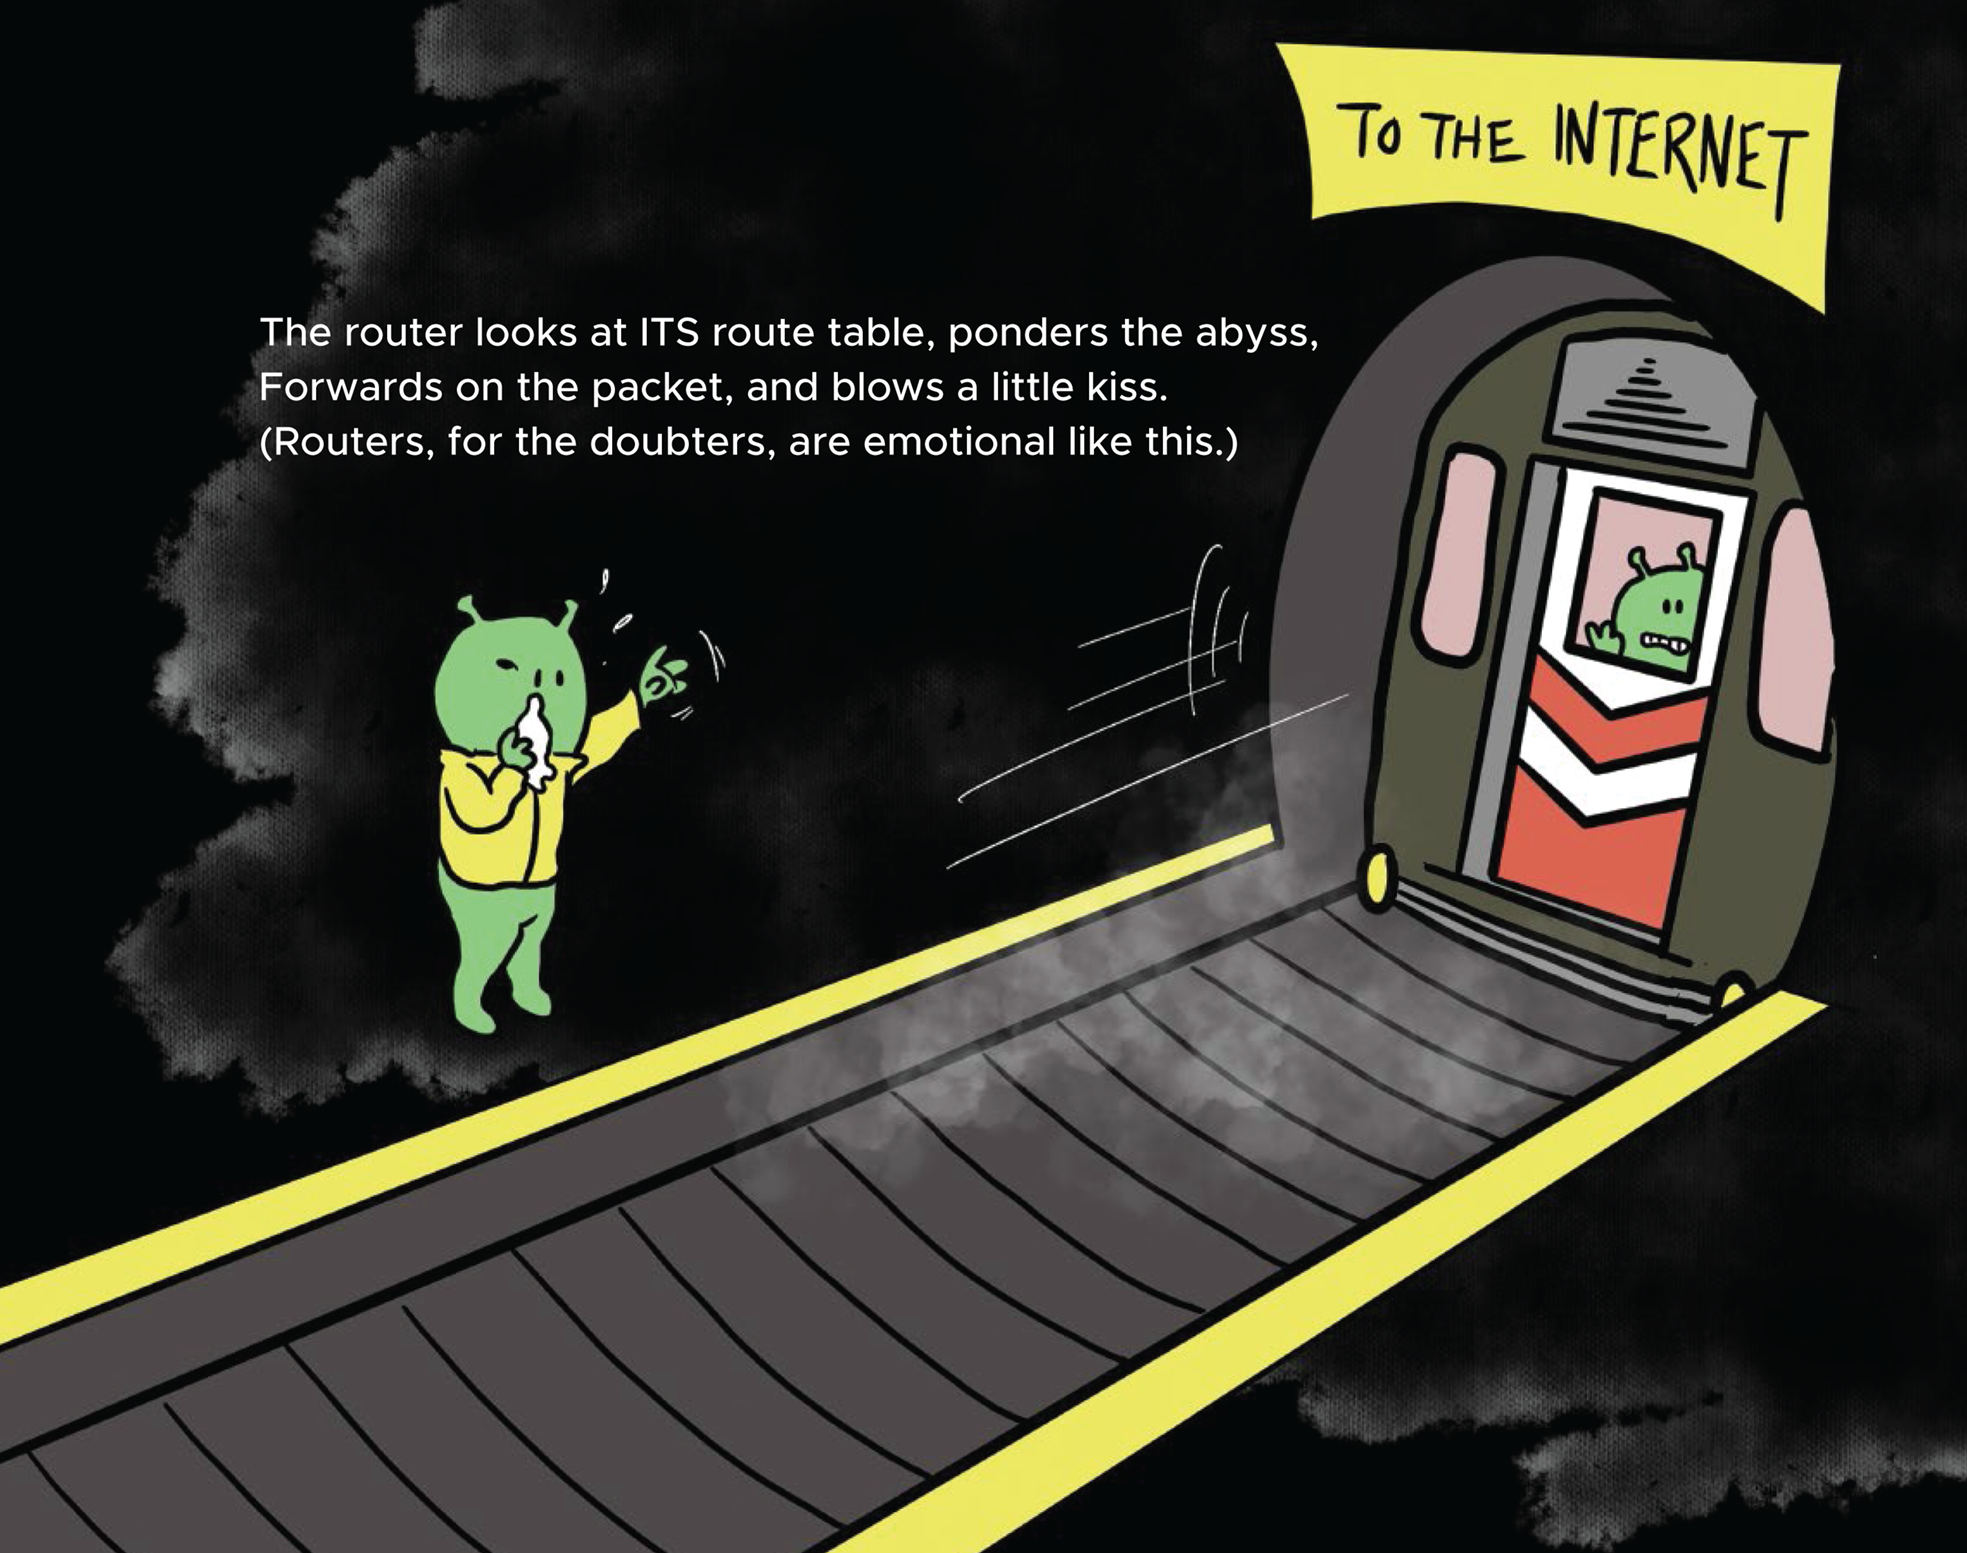 Cartoon illustration of a packets being delivered to the internet.